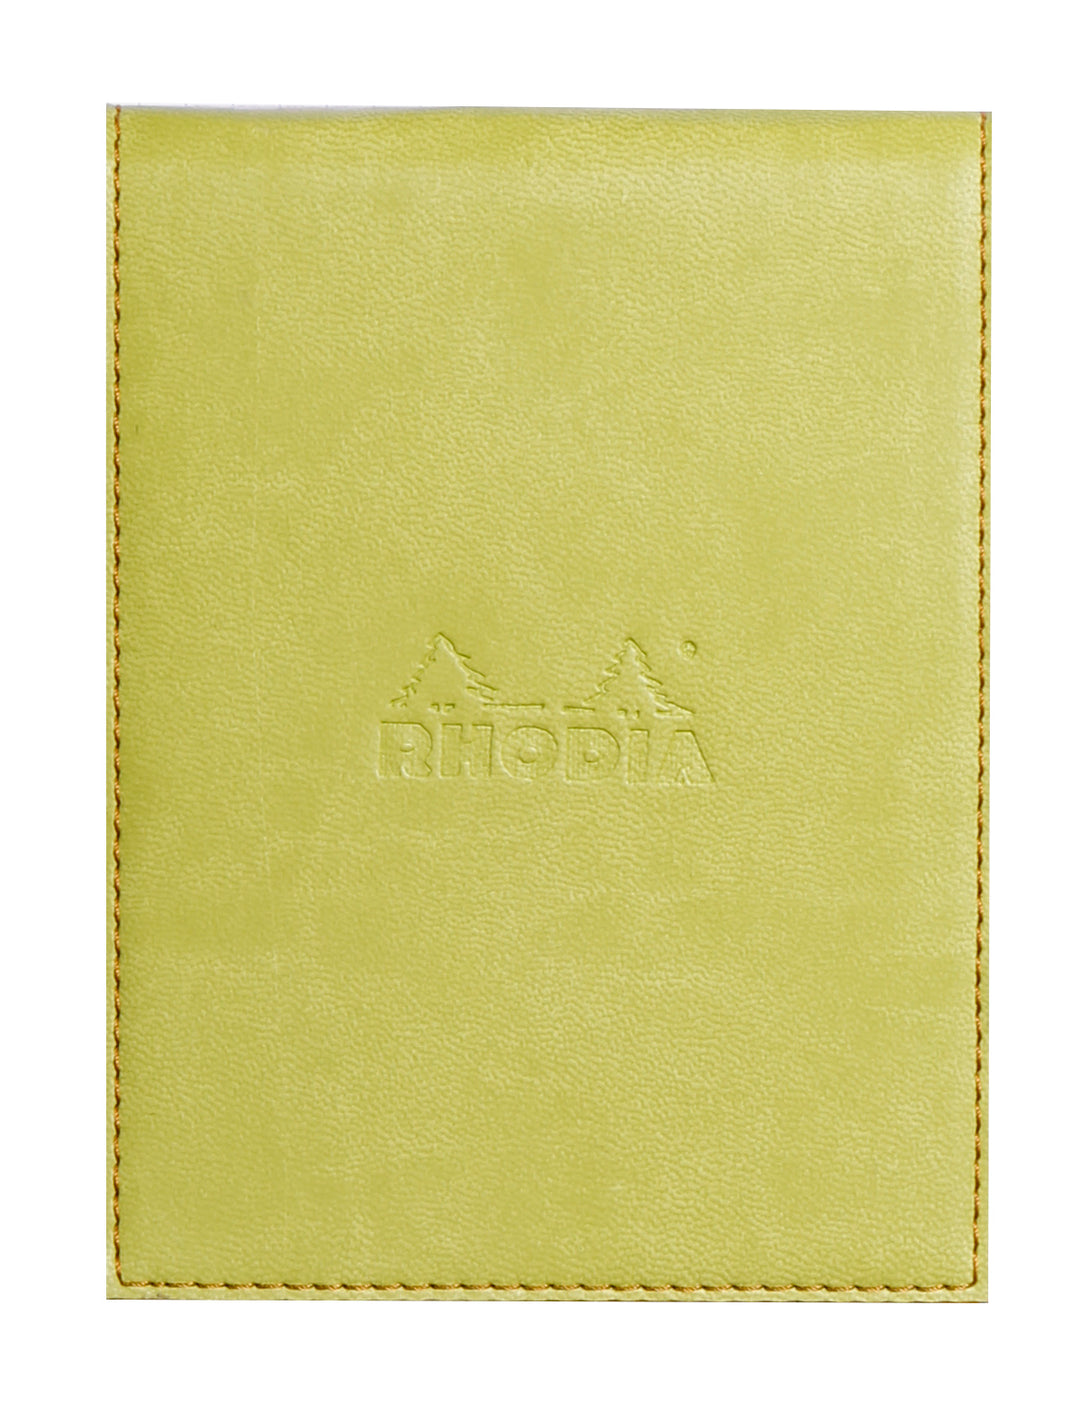 Rhodia Rhodiarama Cover + Line Ruled Stapled Notepad - A6